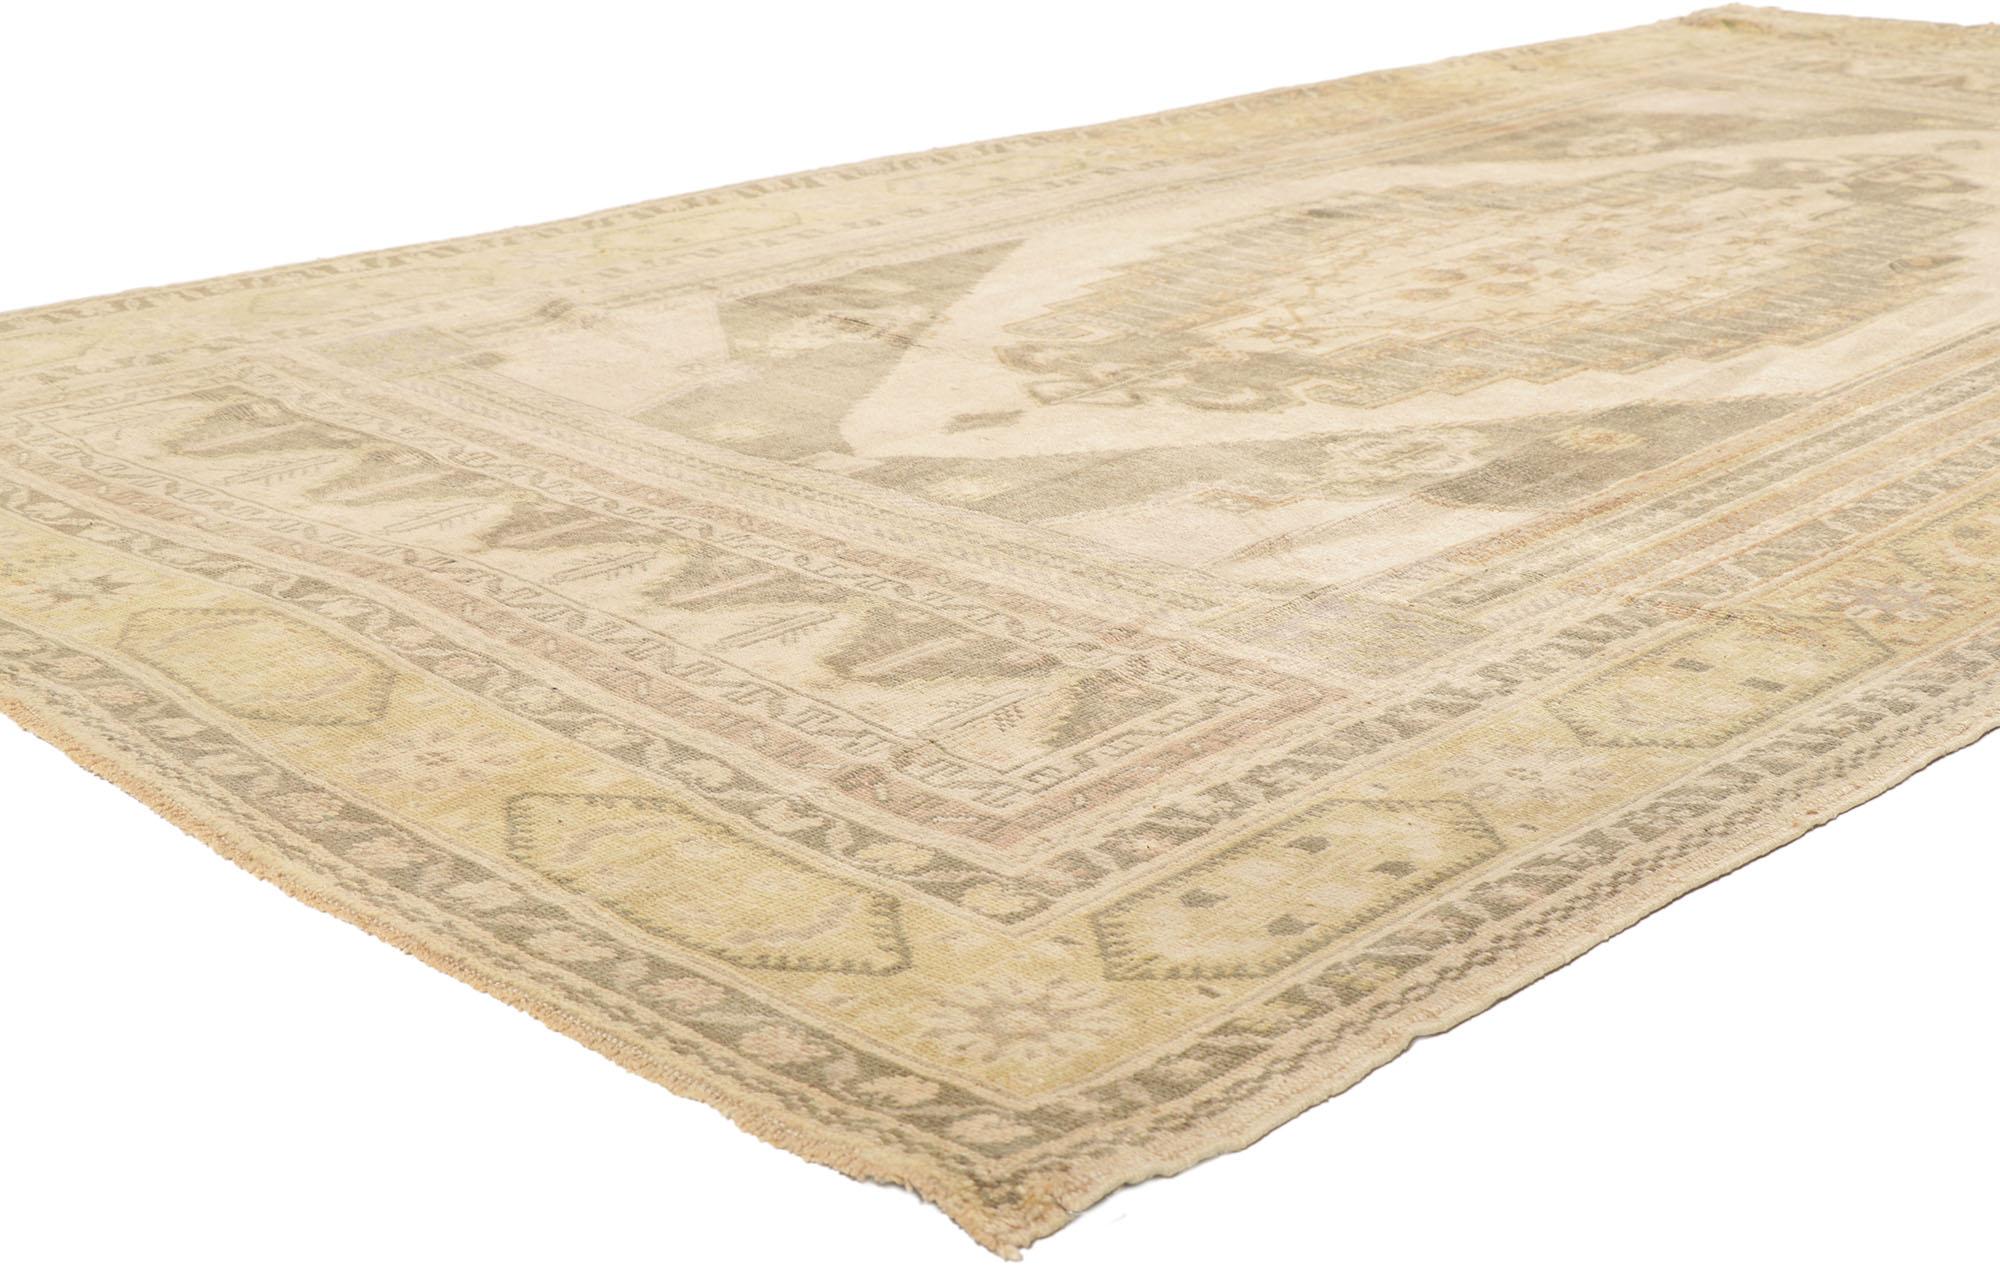 ​53674 Vintage Turkish Oushak Rug, 05'04 x 10'08.
Slip into a world of classic charm and modern flair with this hand knotted wool vintage Turkish Oushak rug. The intricate botanical pattern and subtle earthy hues work together creating an air of